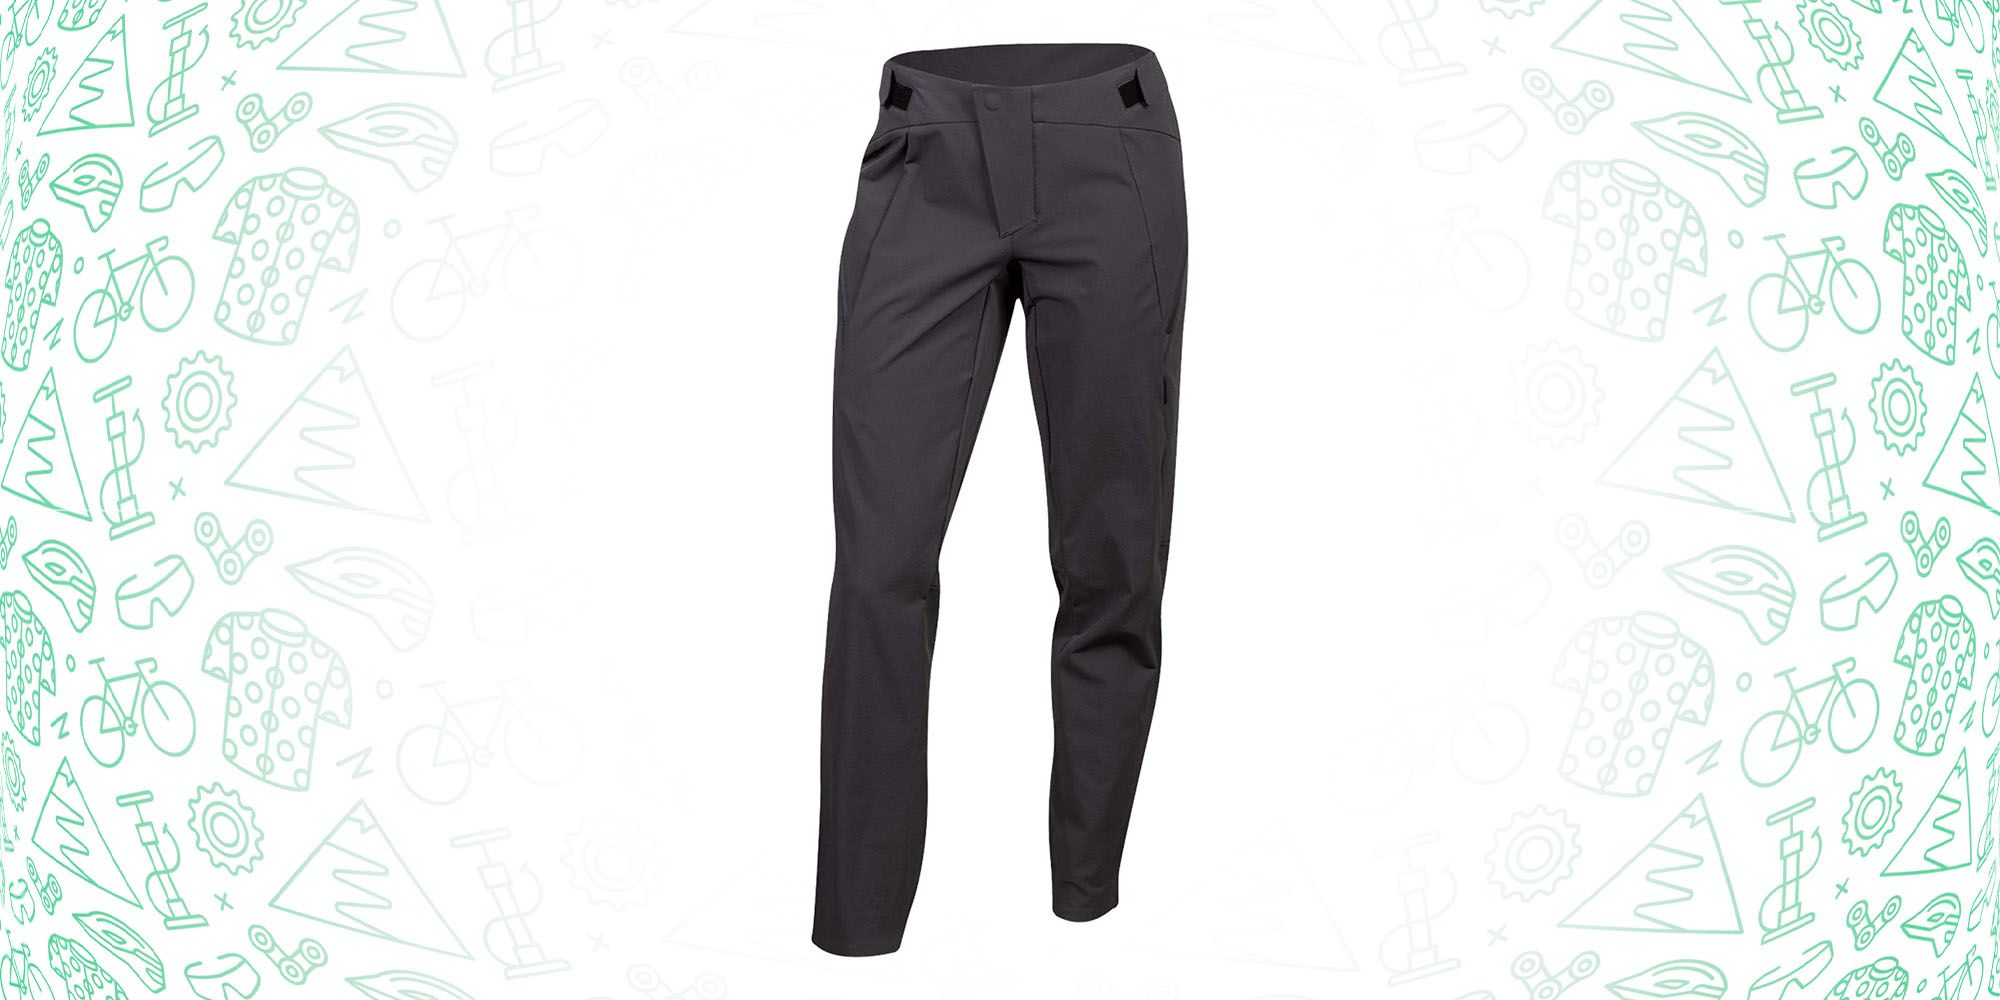 3 Regular-Looking Pants that Work Well as Cycling Pants